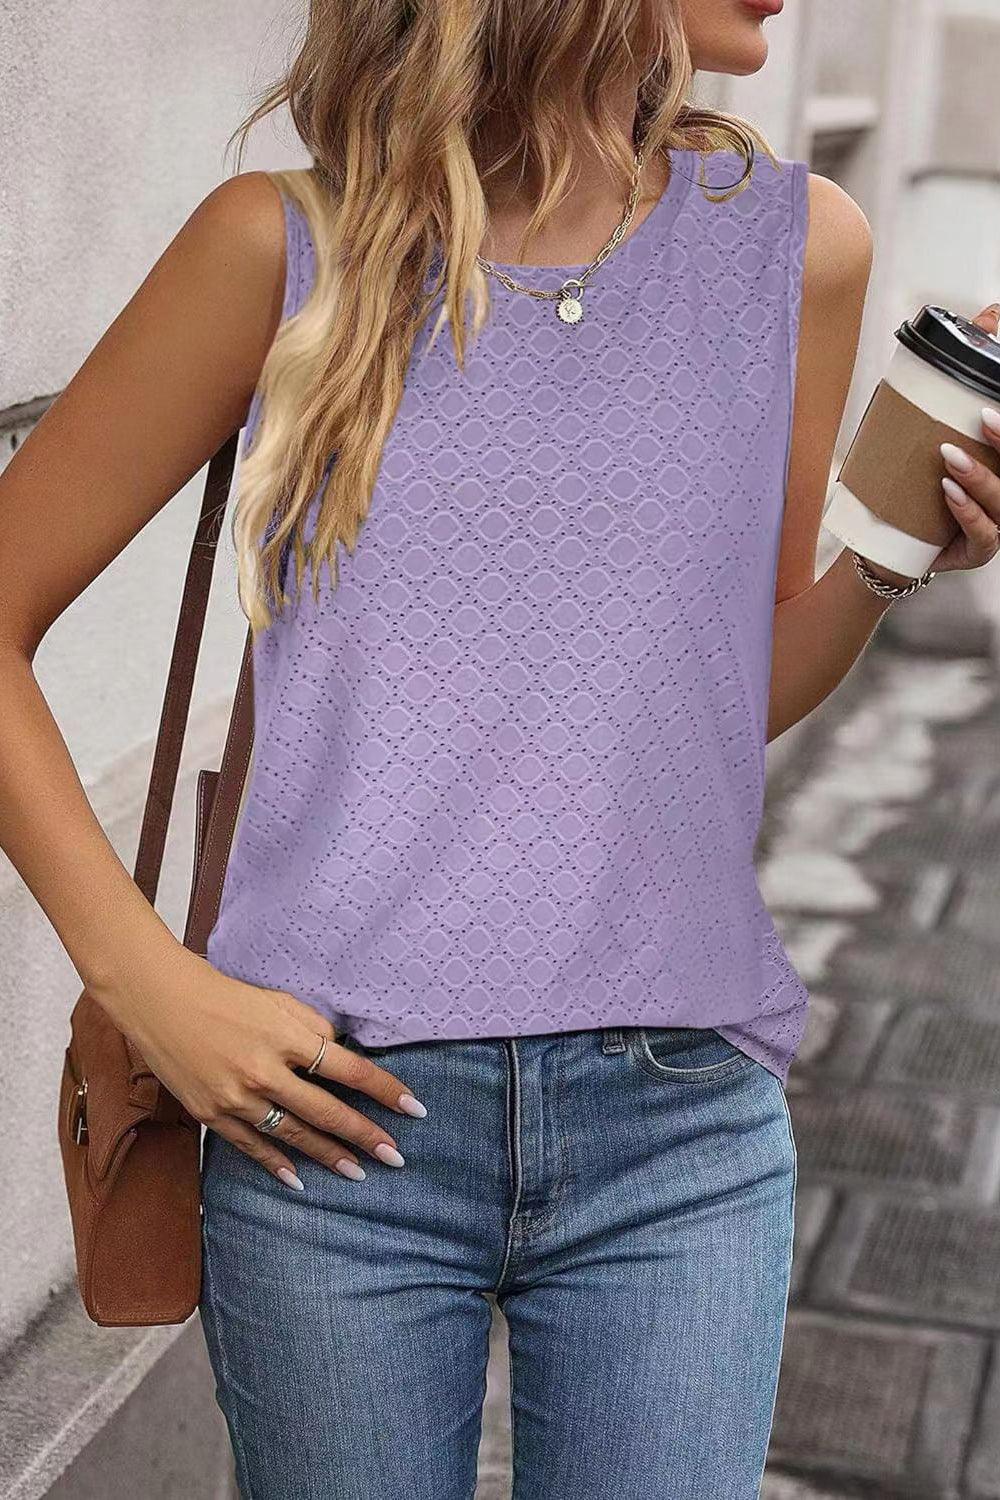 a woman in a purple top holding a cup of coffee